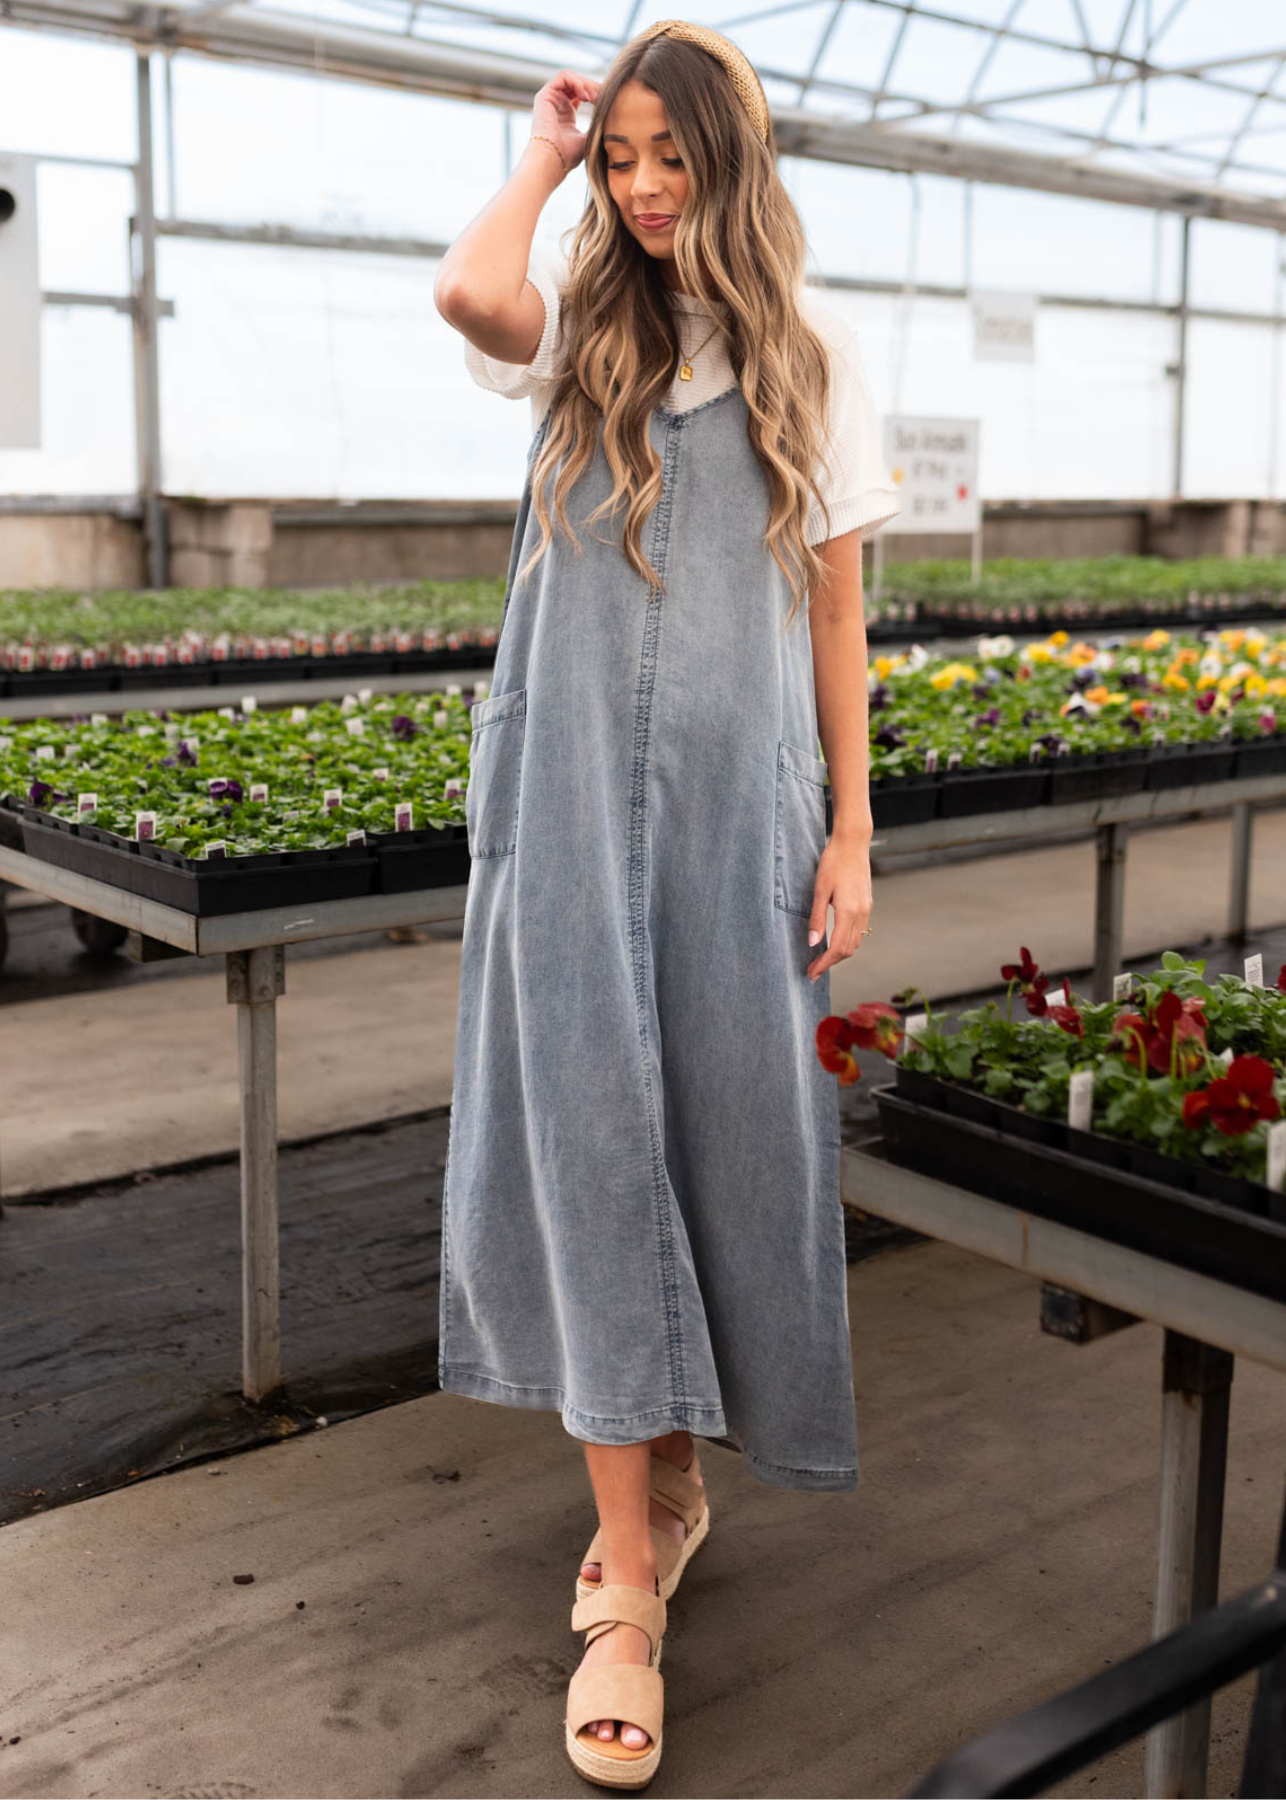 Denim blue overall dress with side pockets